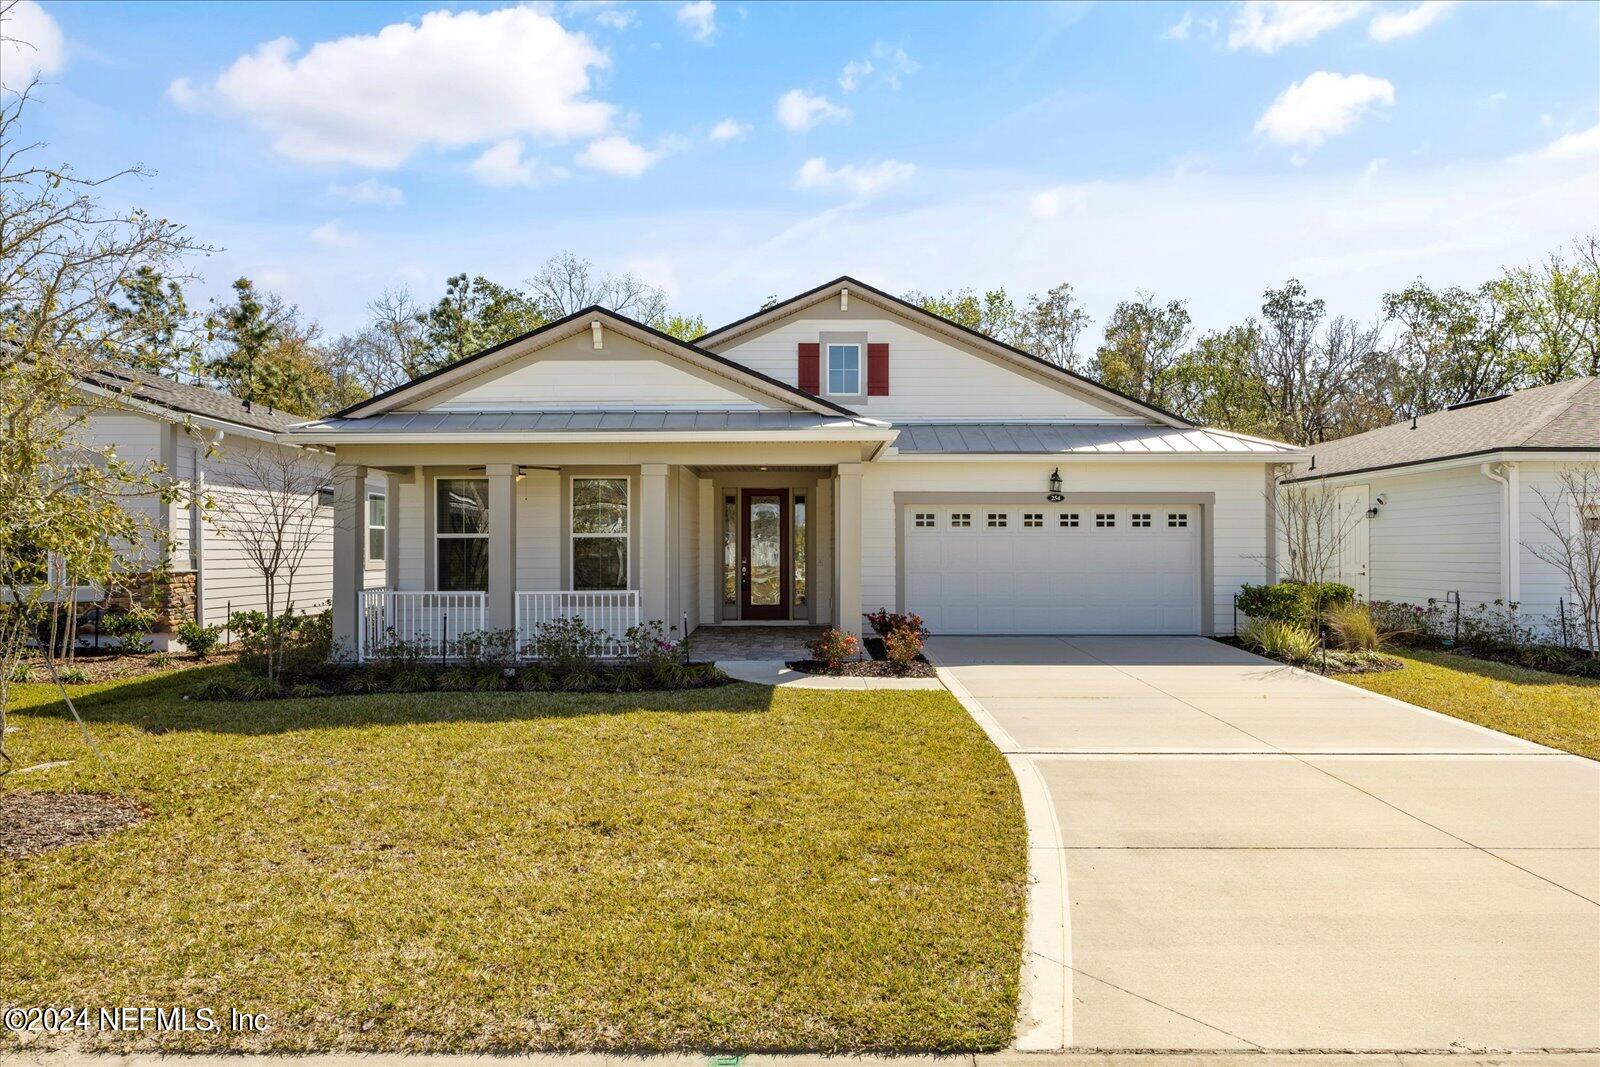 St Johns, FL home for sale located at 254 Ladyslipper Drive, St Johns, FL 32259